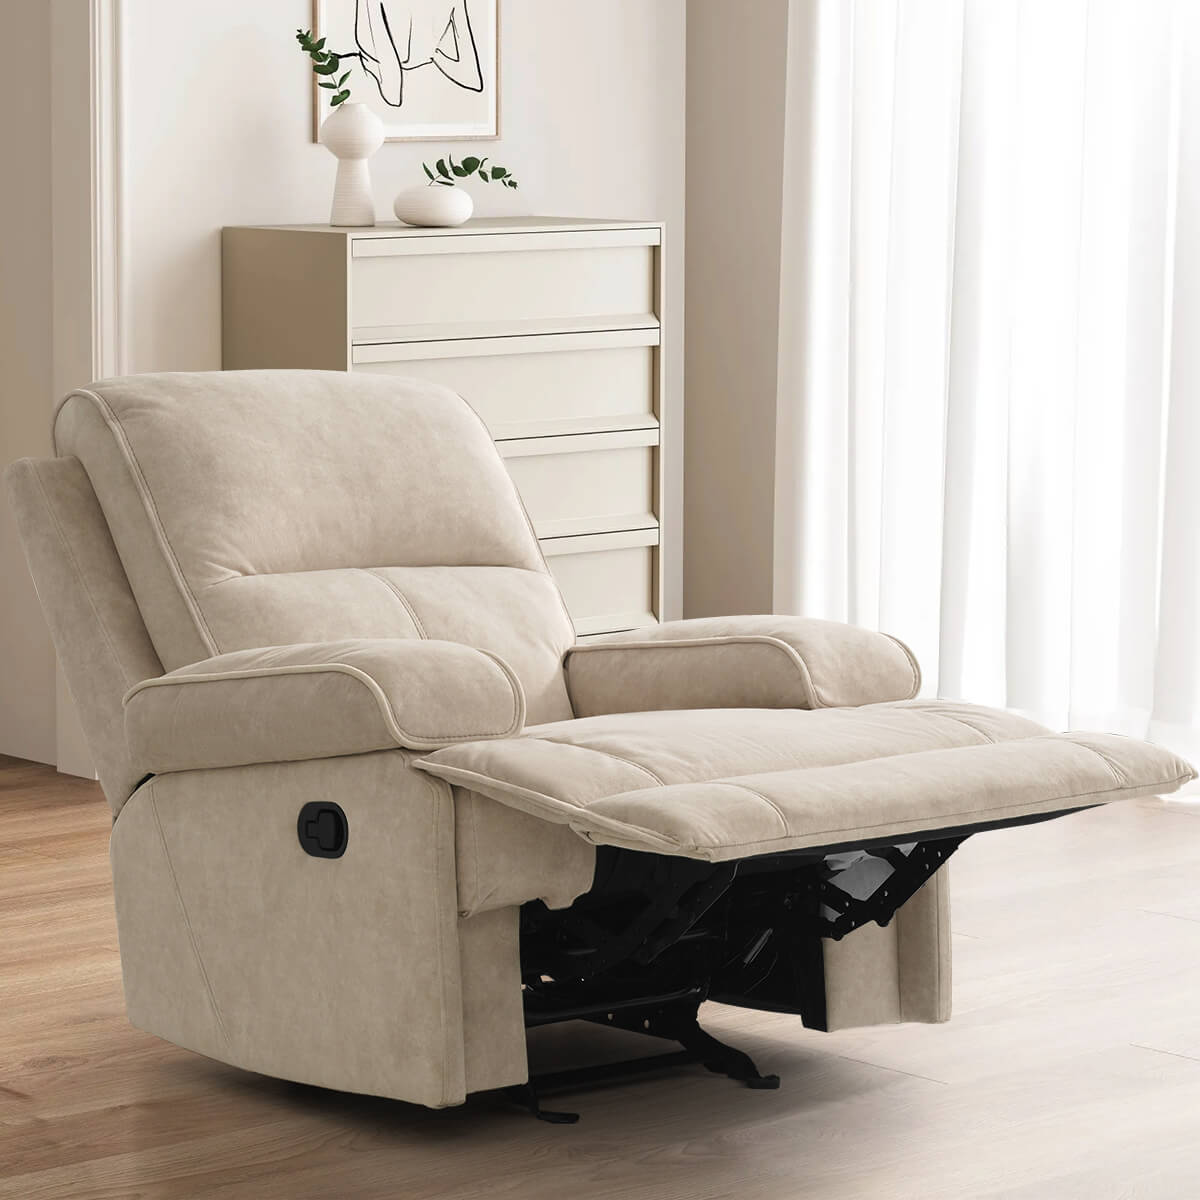 Manual Rocking Recliner Nursery Gliders, Breathable Fabric Flaxen